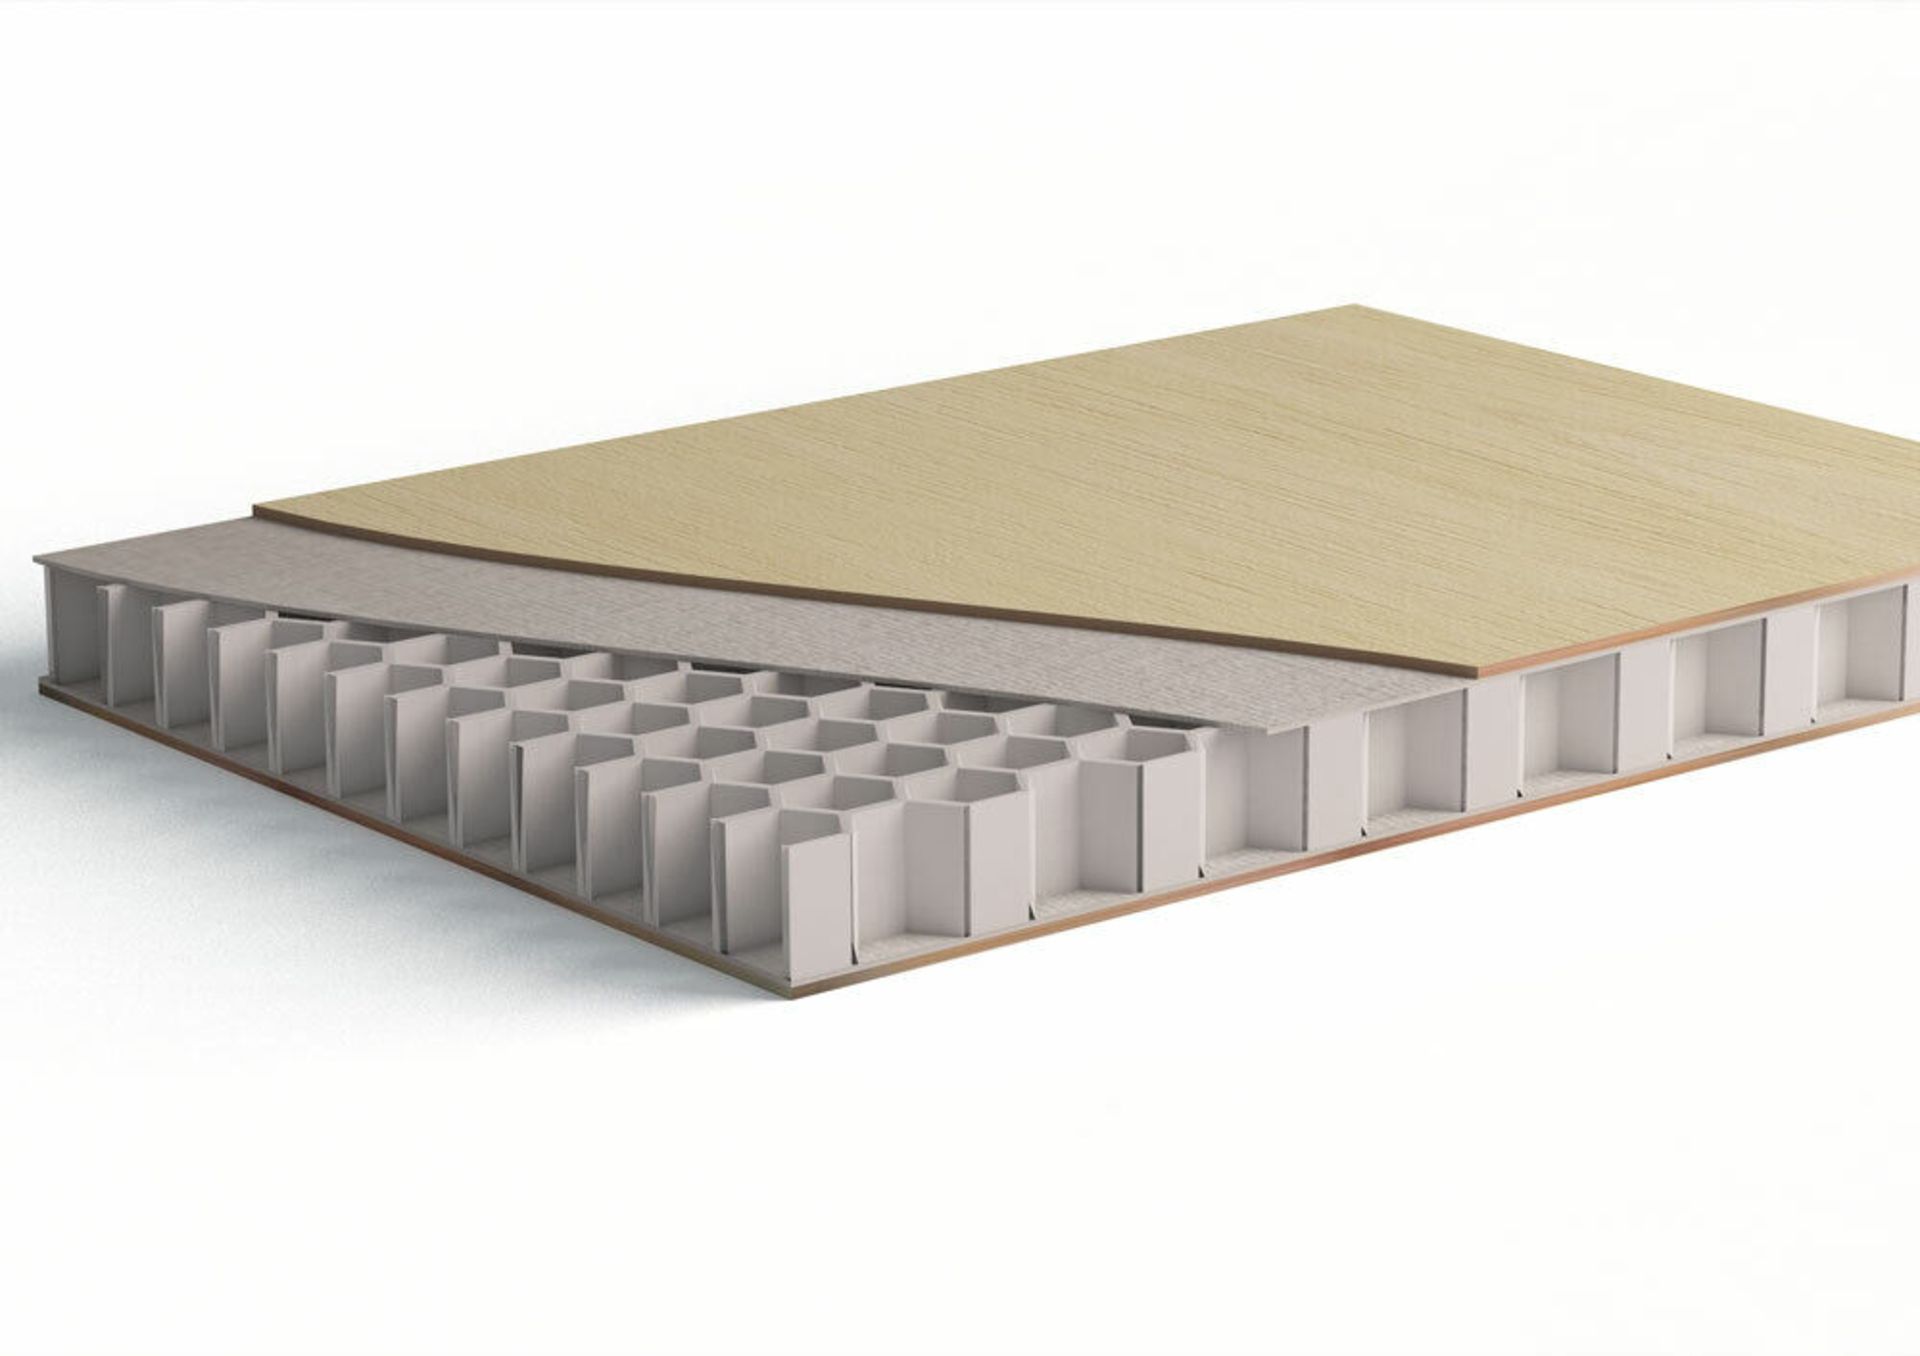 100 x ThermHex Thermoplastic Honeycomb Core Panels - Size: Approx. 2630 x 1210 x 18mm - New - Image 9 of 12